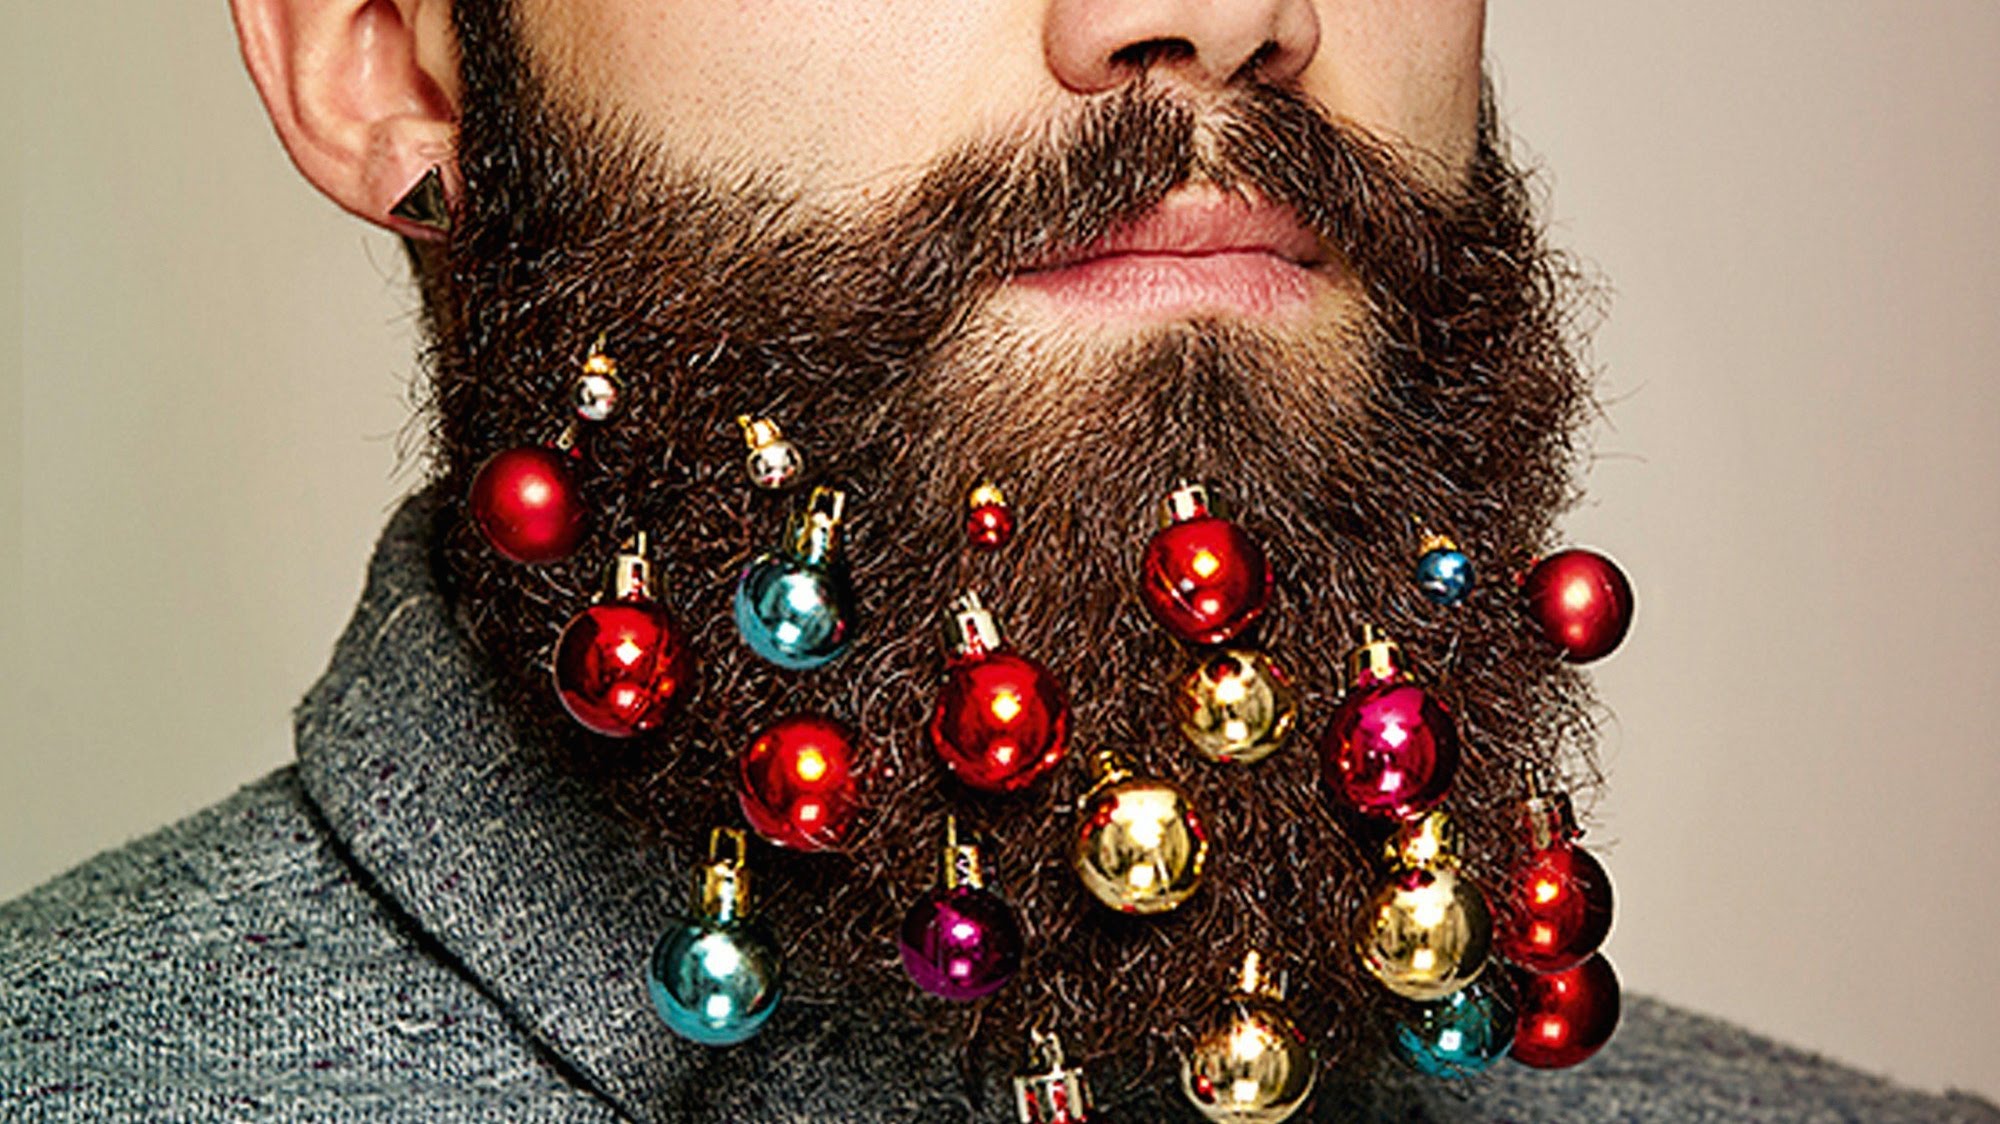 Beard Bauble Ornaments Sell Out Ahead of Christmas - YouTube